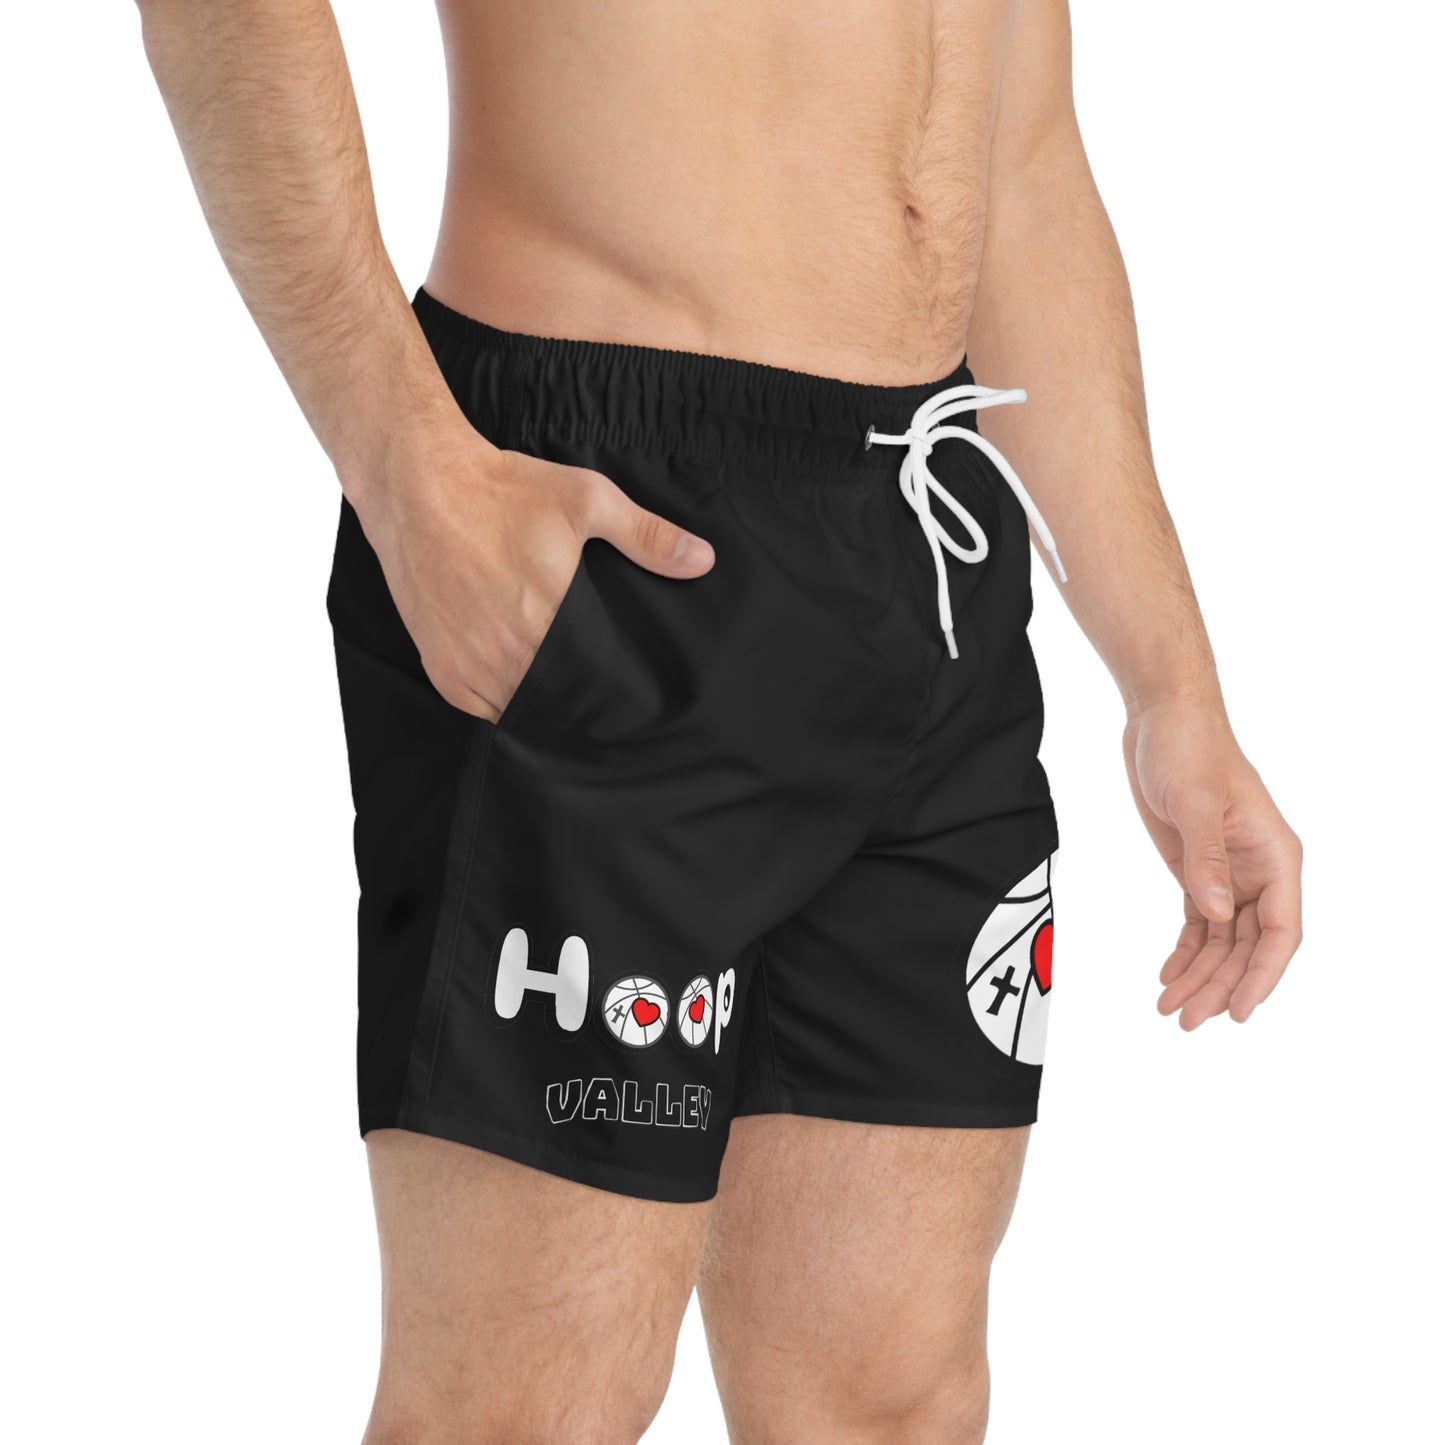 Hoop Valley Black With White Logo